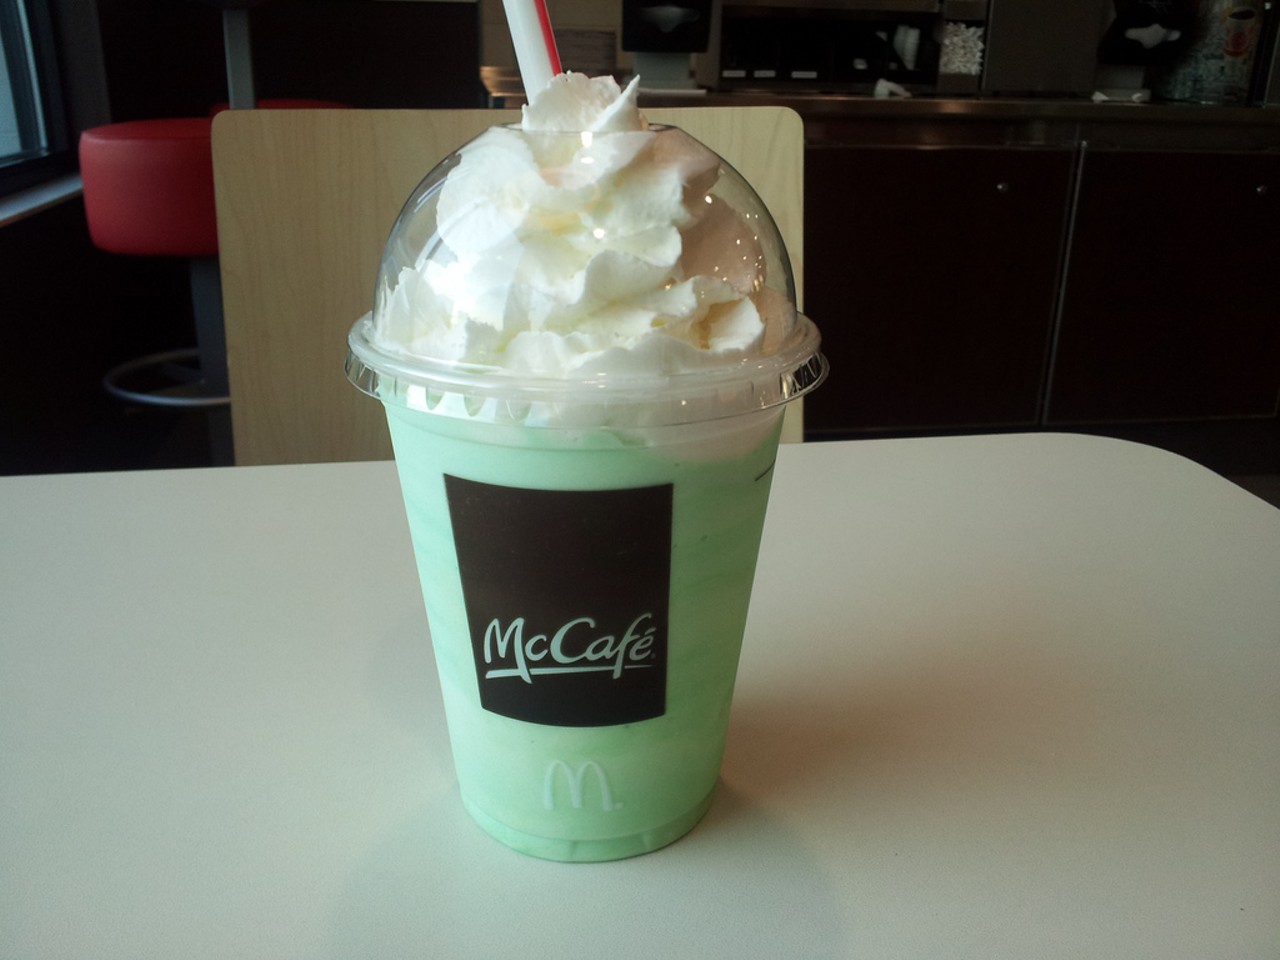 Get a shamrock shake at McDonald's Let's not kid ourselves, they're magically delicious. (Photo via Flickr user Todd Van Hoosear)